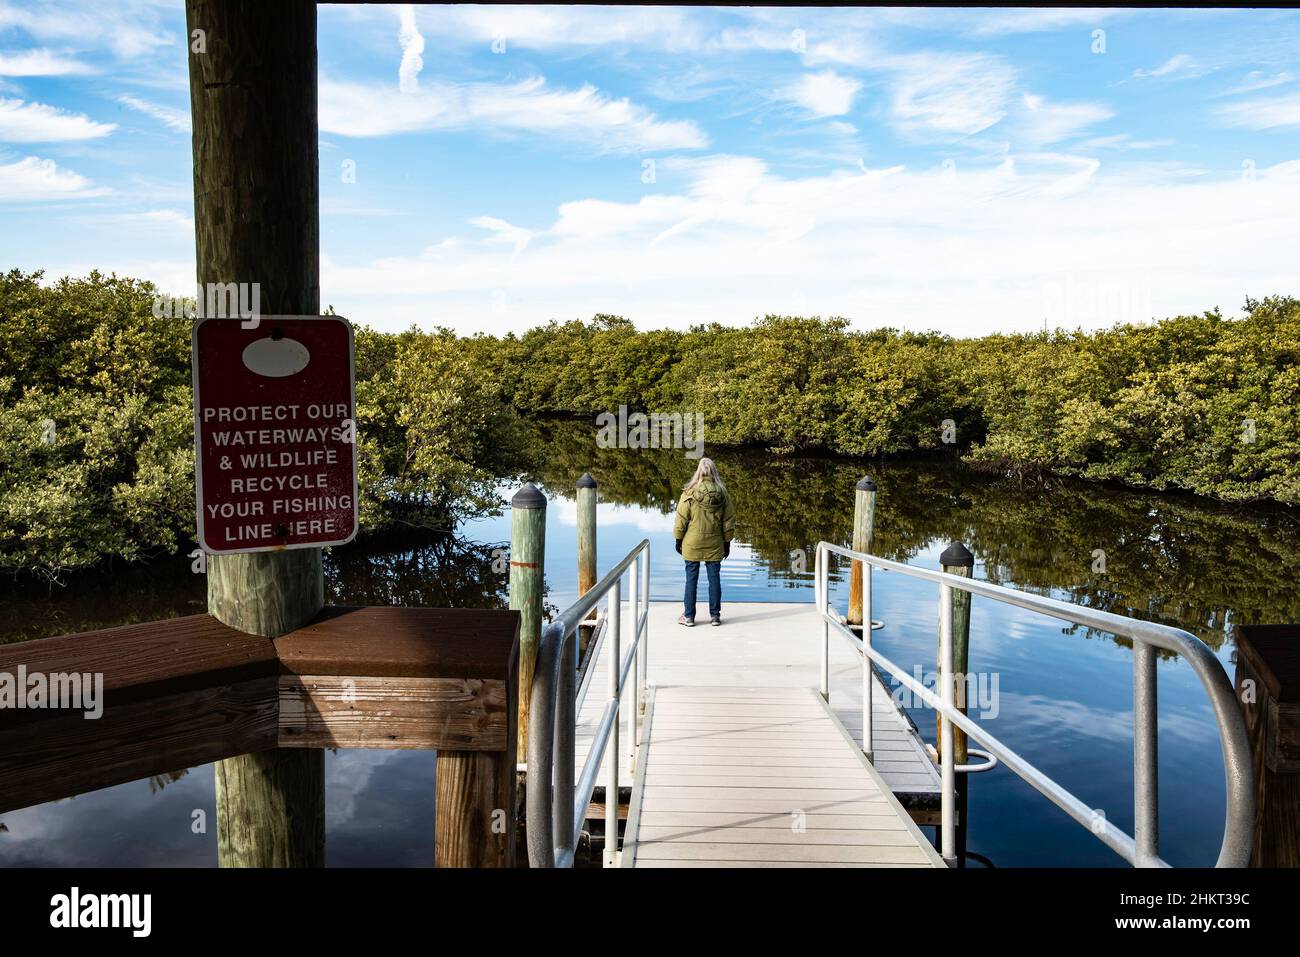 A back view of a mature 50-60 year old woman with long gray hair and wearing a parka standing on a floating dock in the Ponce Inlet Preserve, Florida Stock Photo